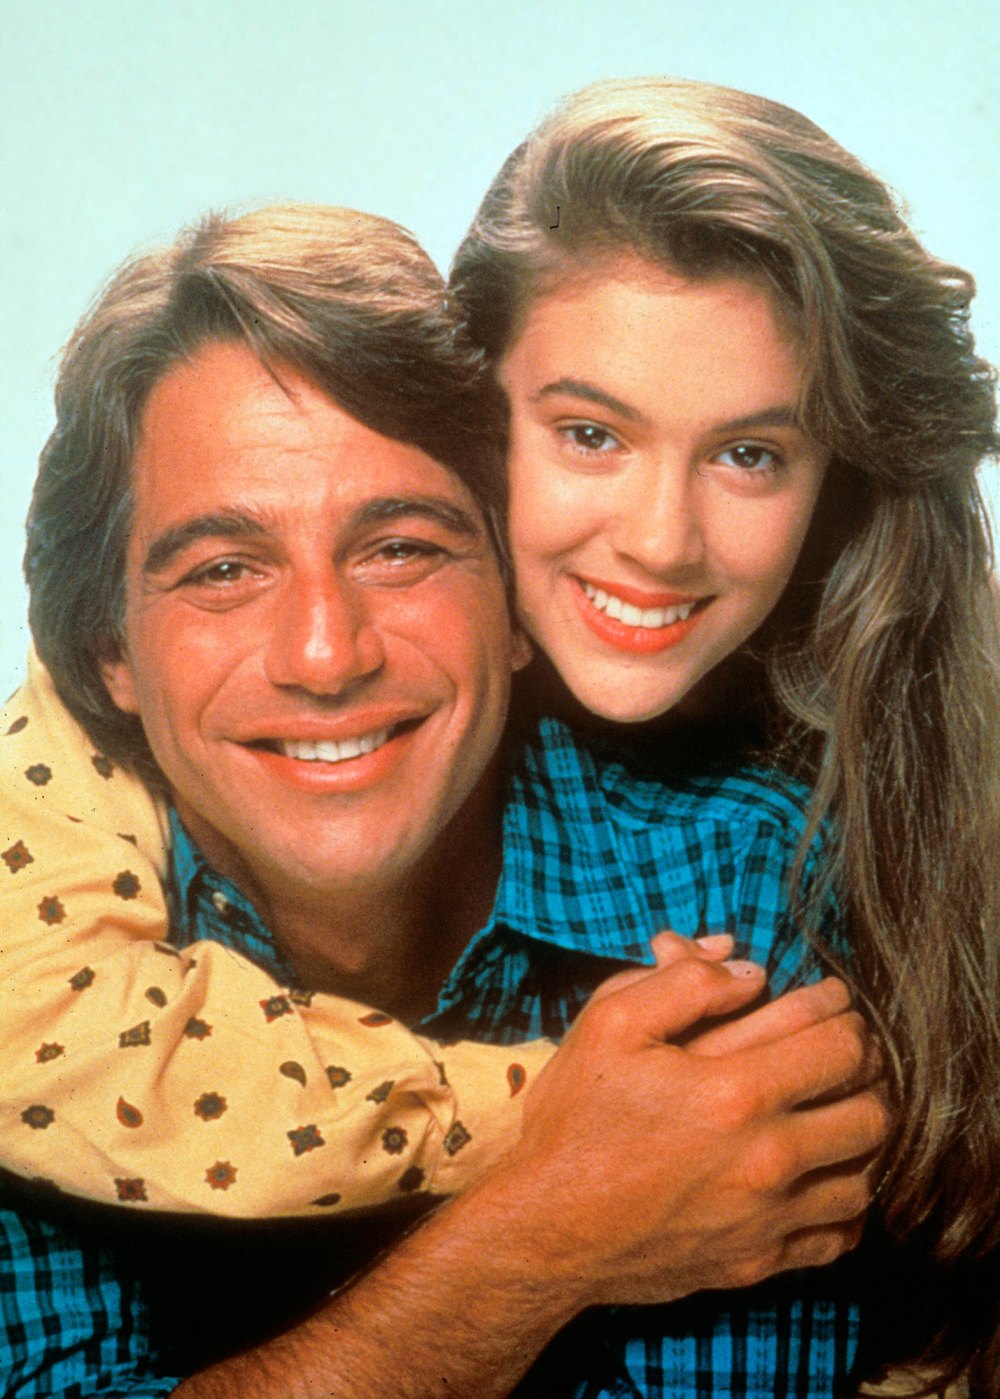 Alyssa Milano Brings Her Son to See ‘TV Dad’ Tony Danza: ‘Tonight Was Very Special for Me’